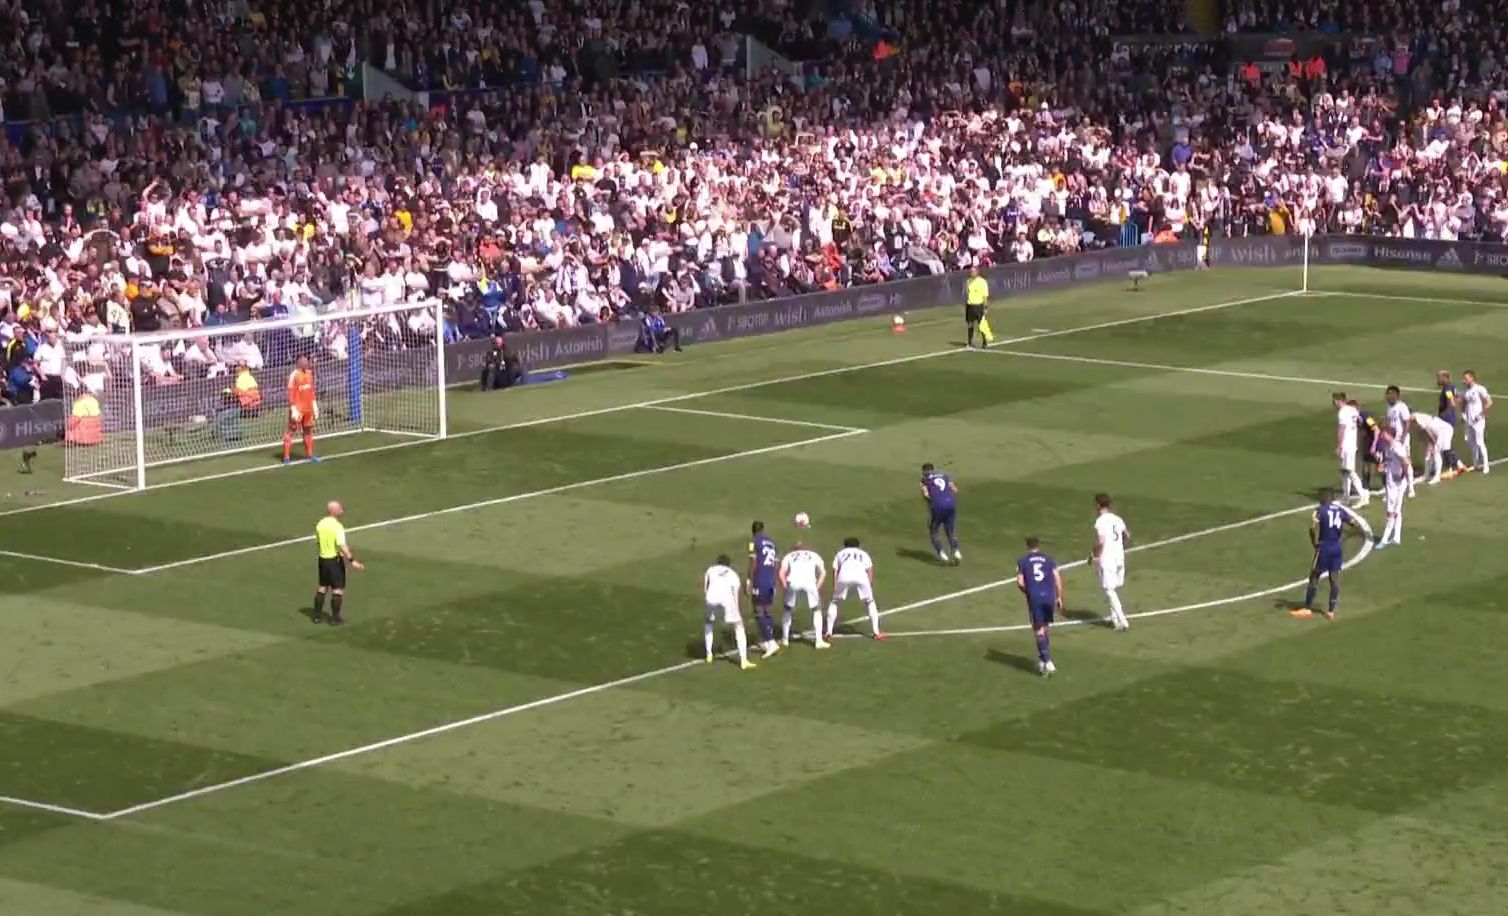 Video: One penalty scored and another missed in crazy few minutes during Leeds vs Newcastle CaughtOffside